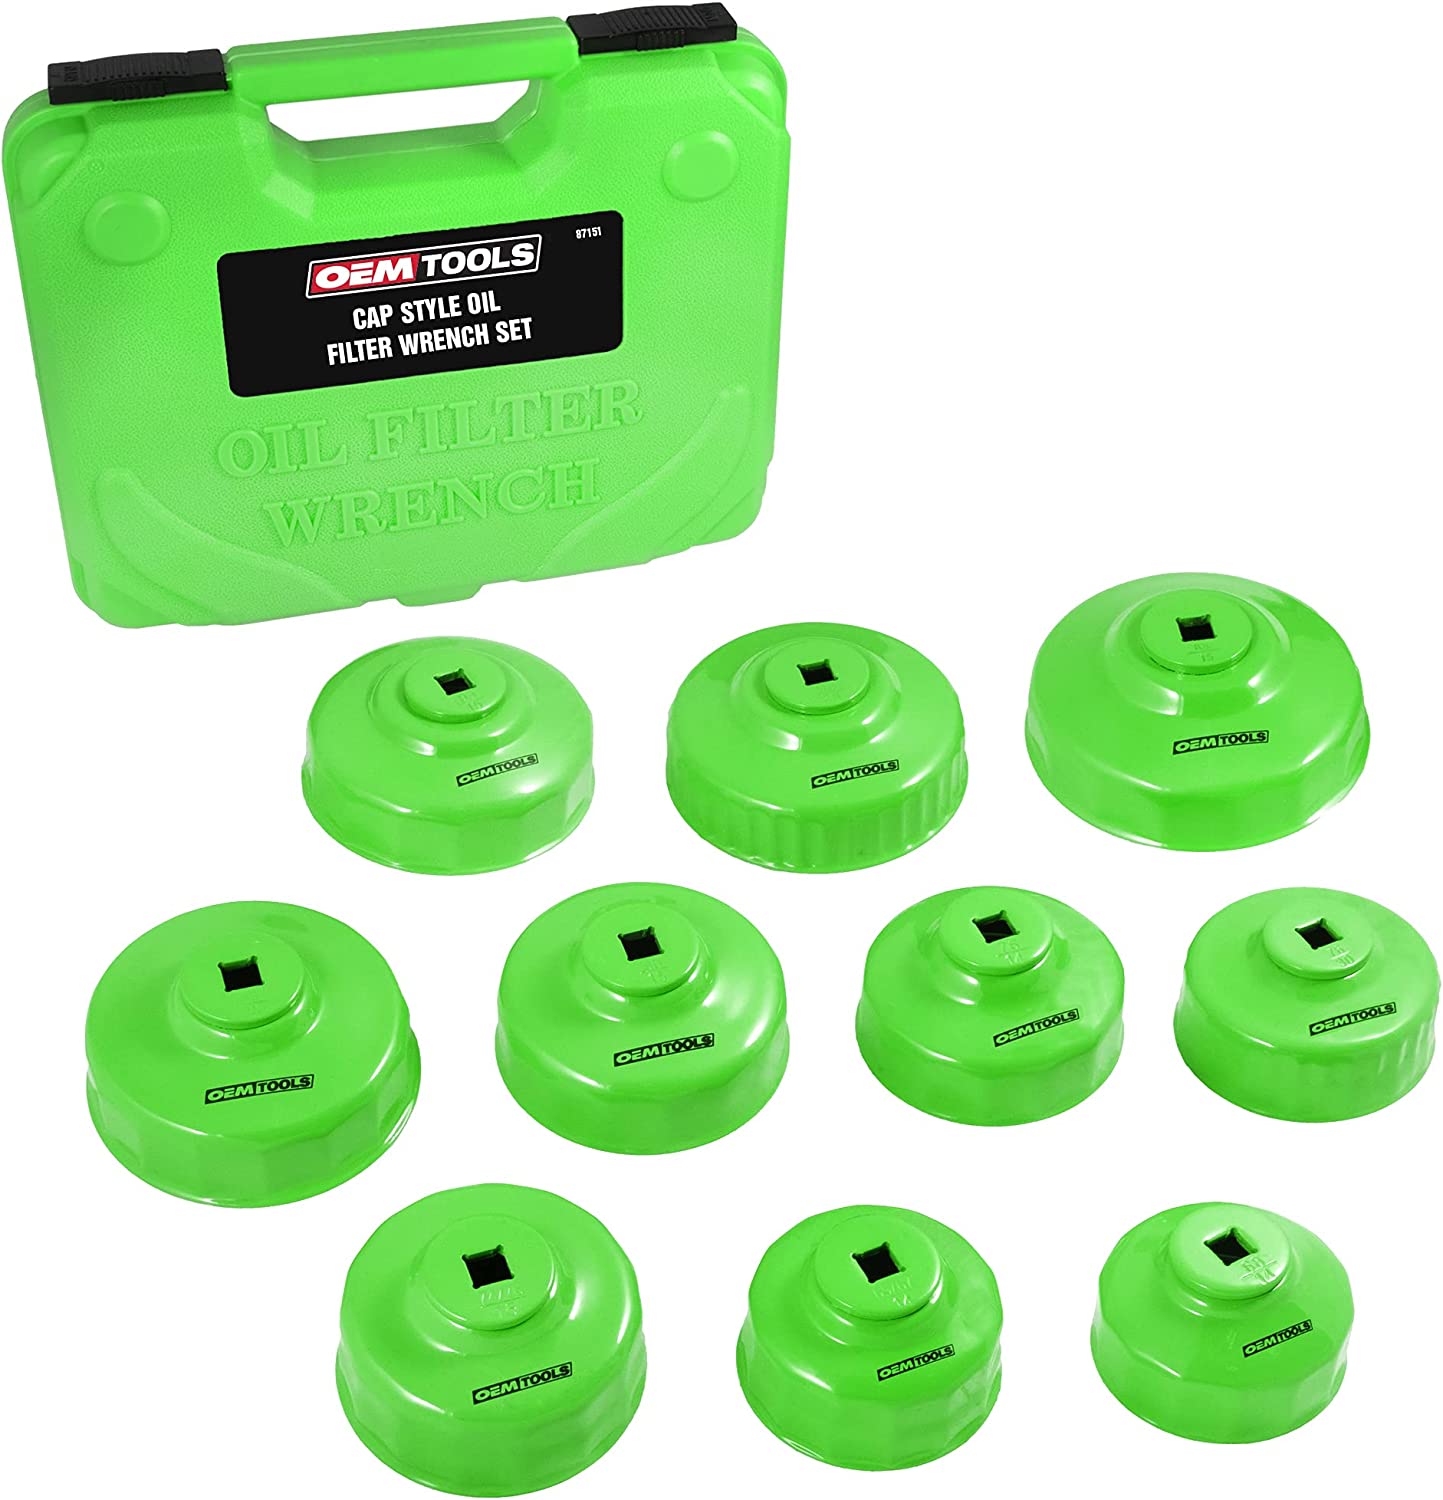 10-Piece Metric Cap Oil Filter Wrench Set $32.99 shipped w/ Prime